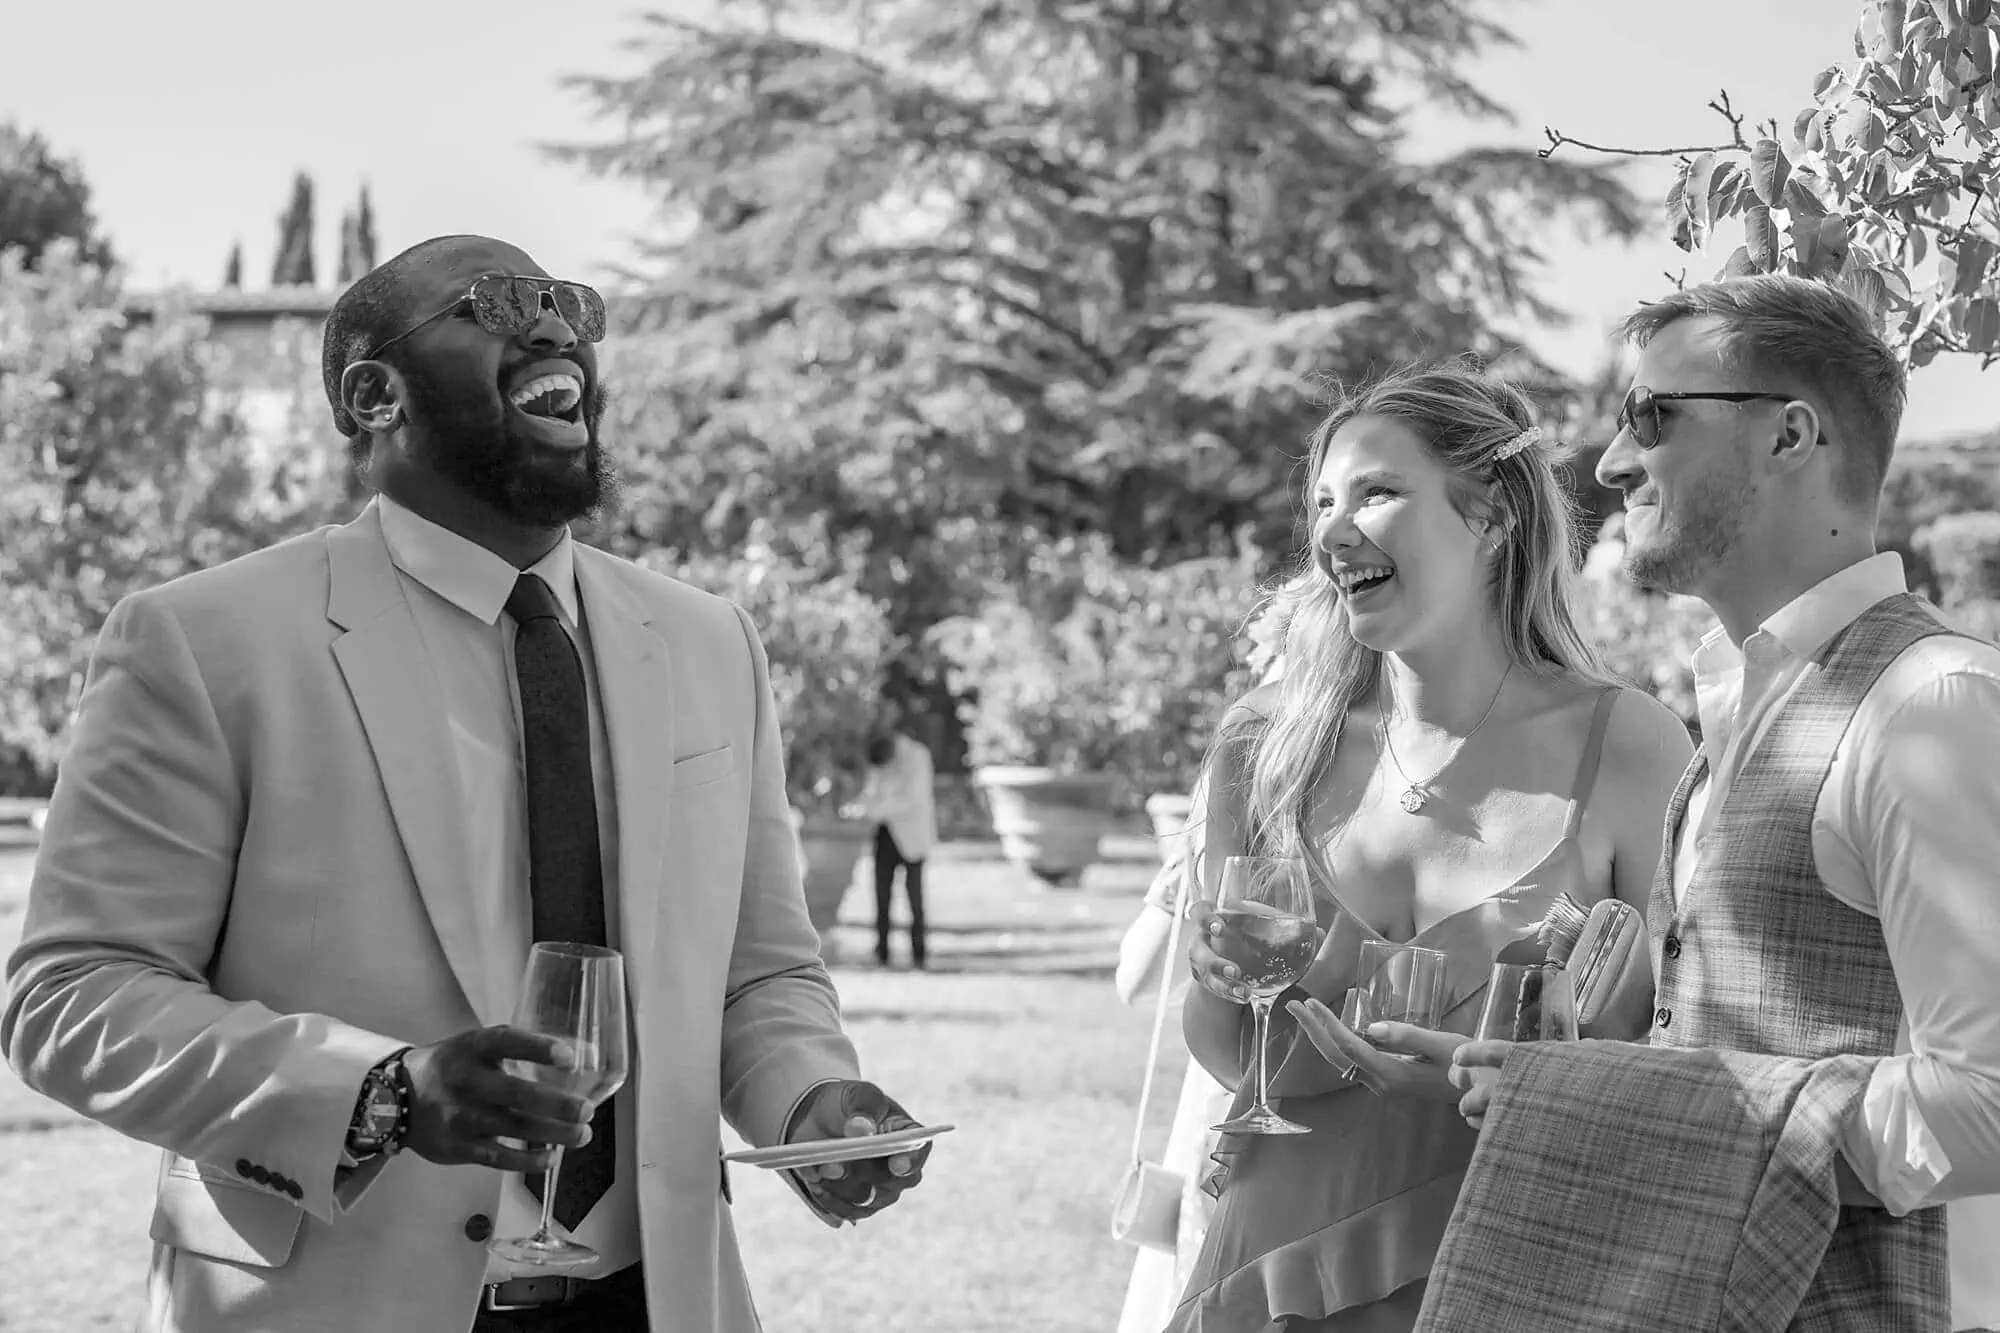 laughing guests at an Italy wedding